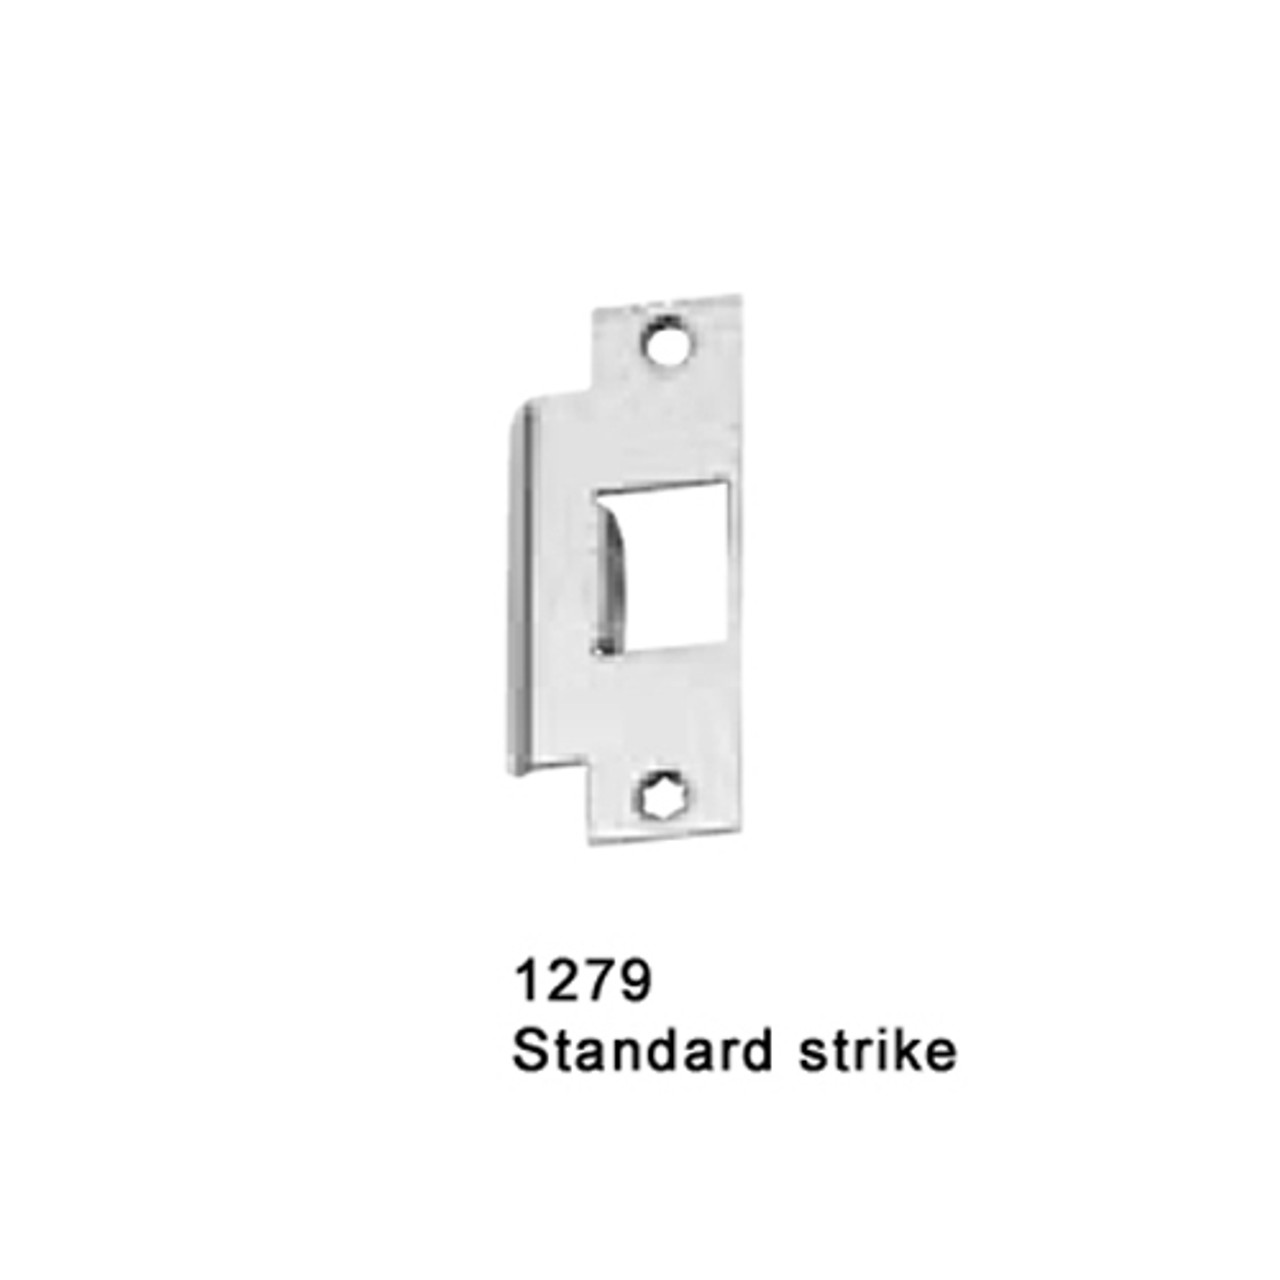 CD25-M-TP-BE-US26-3-RHR Falcon 25 Series Mortise Lock Devices 512TP-BE Thumbpiece Trim with Blank Escutcheon in Polished Chrome